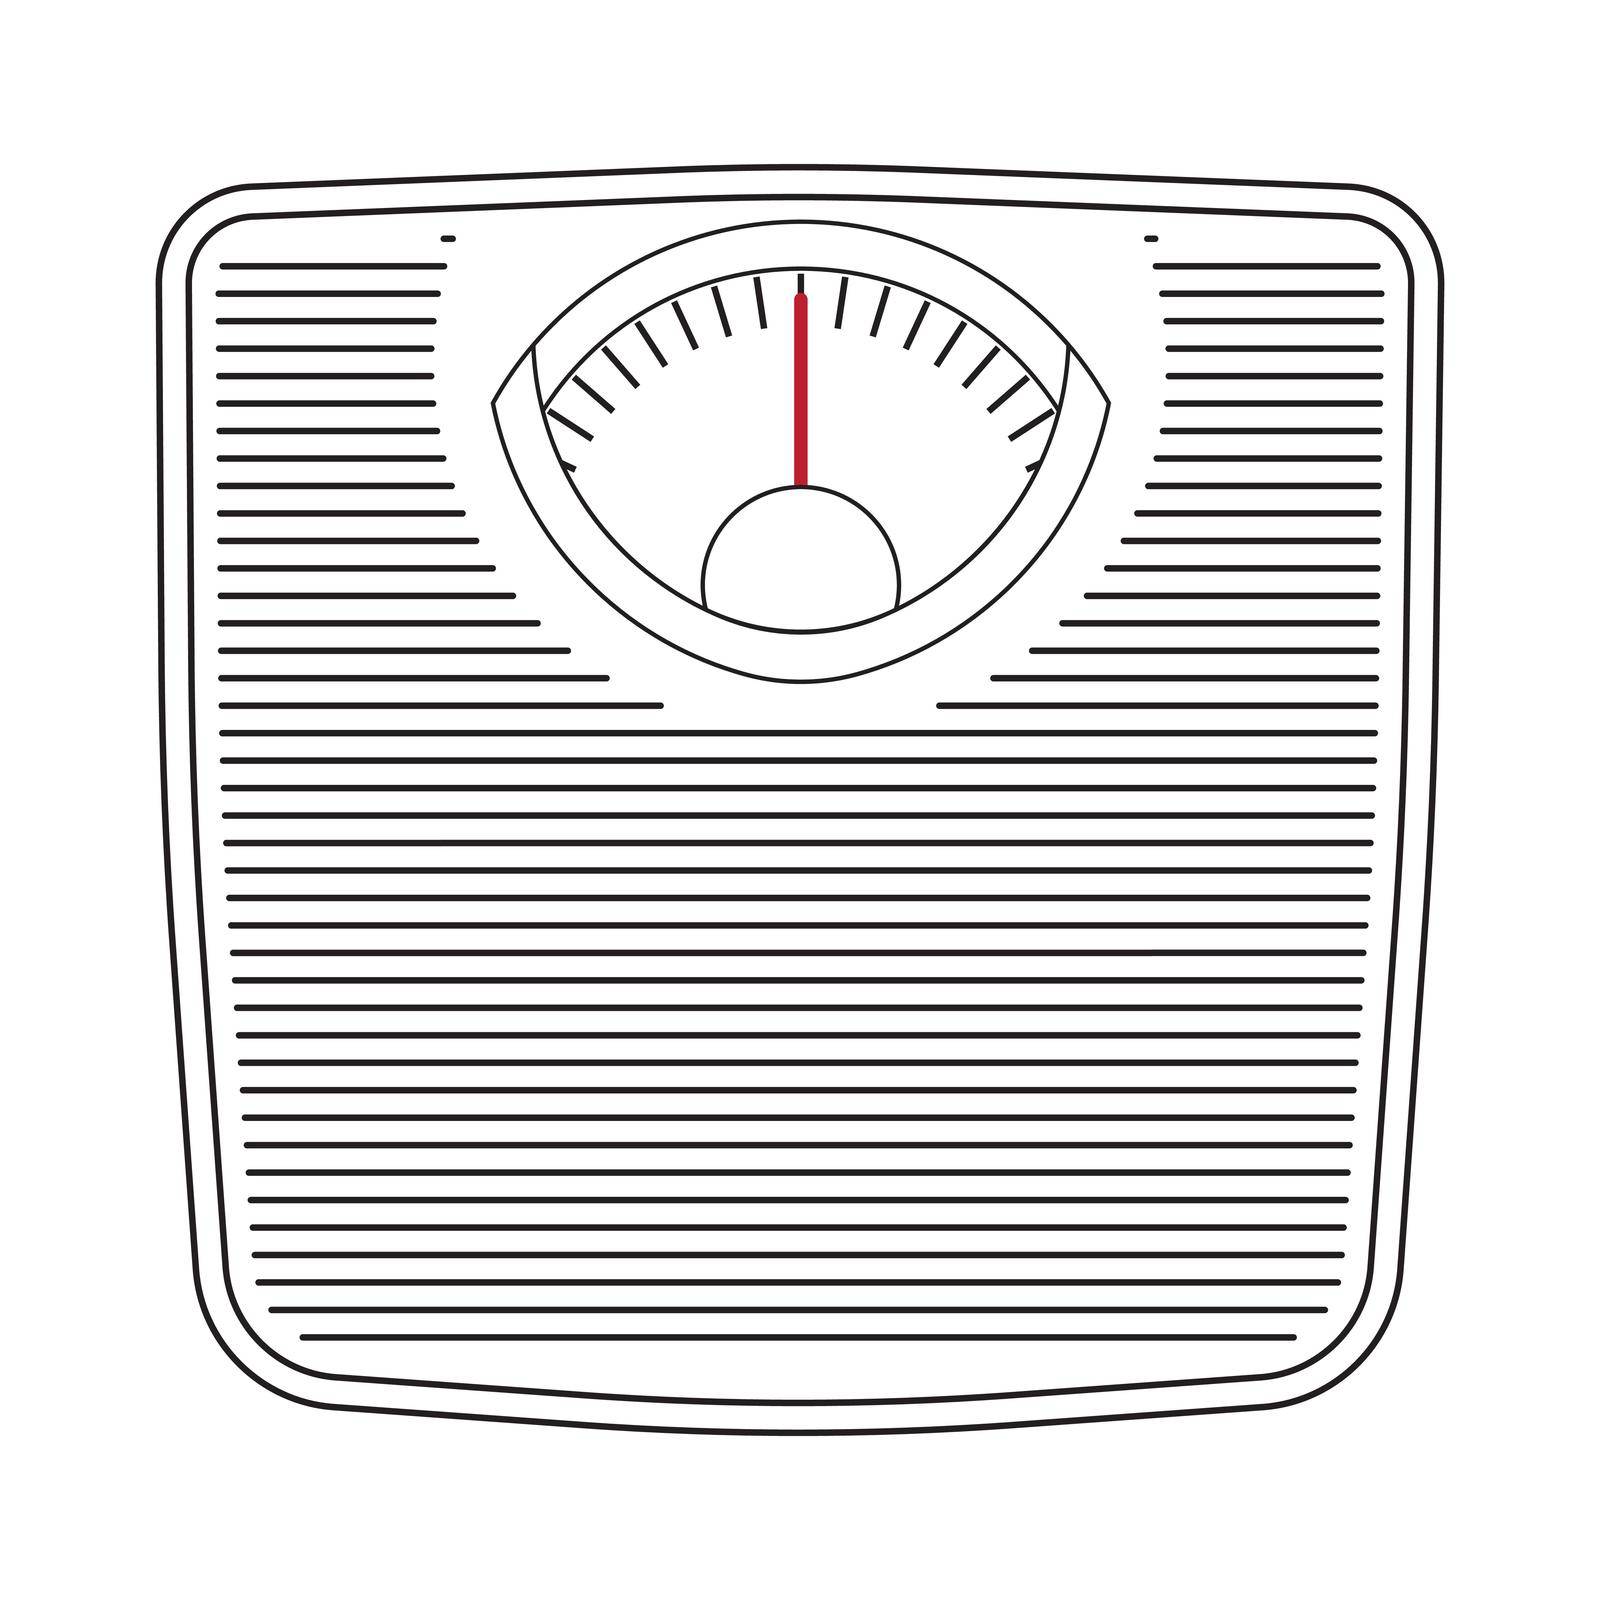 Weighing scale isolated. Floor weight scale. Scale icon. by Chekman